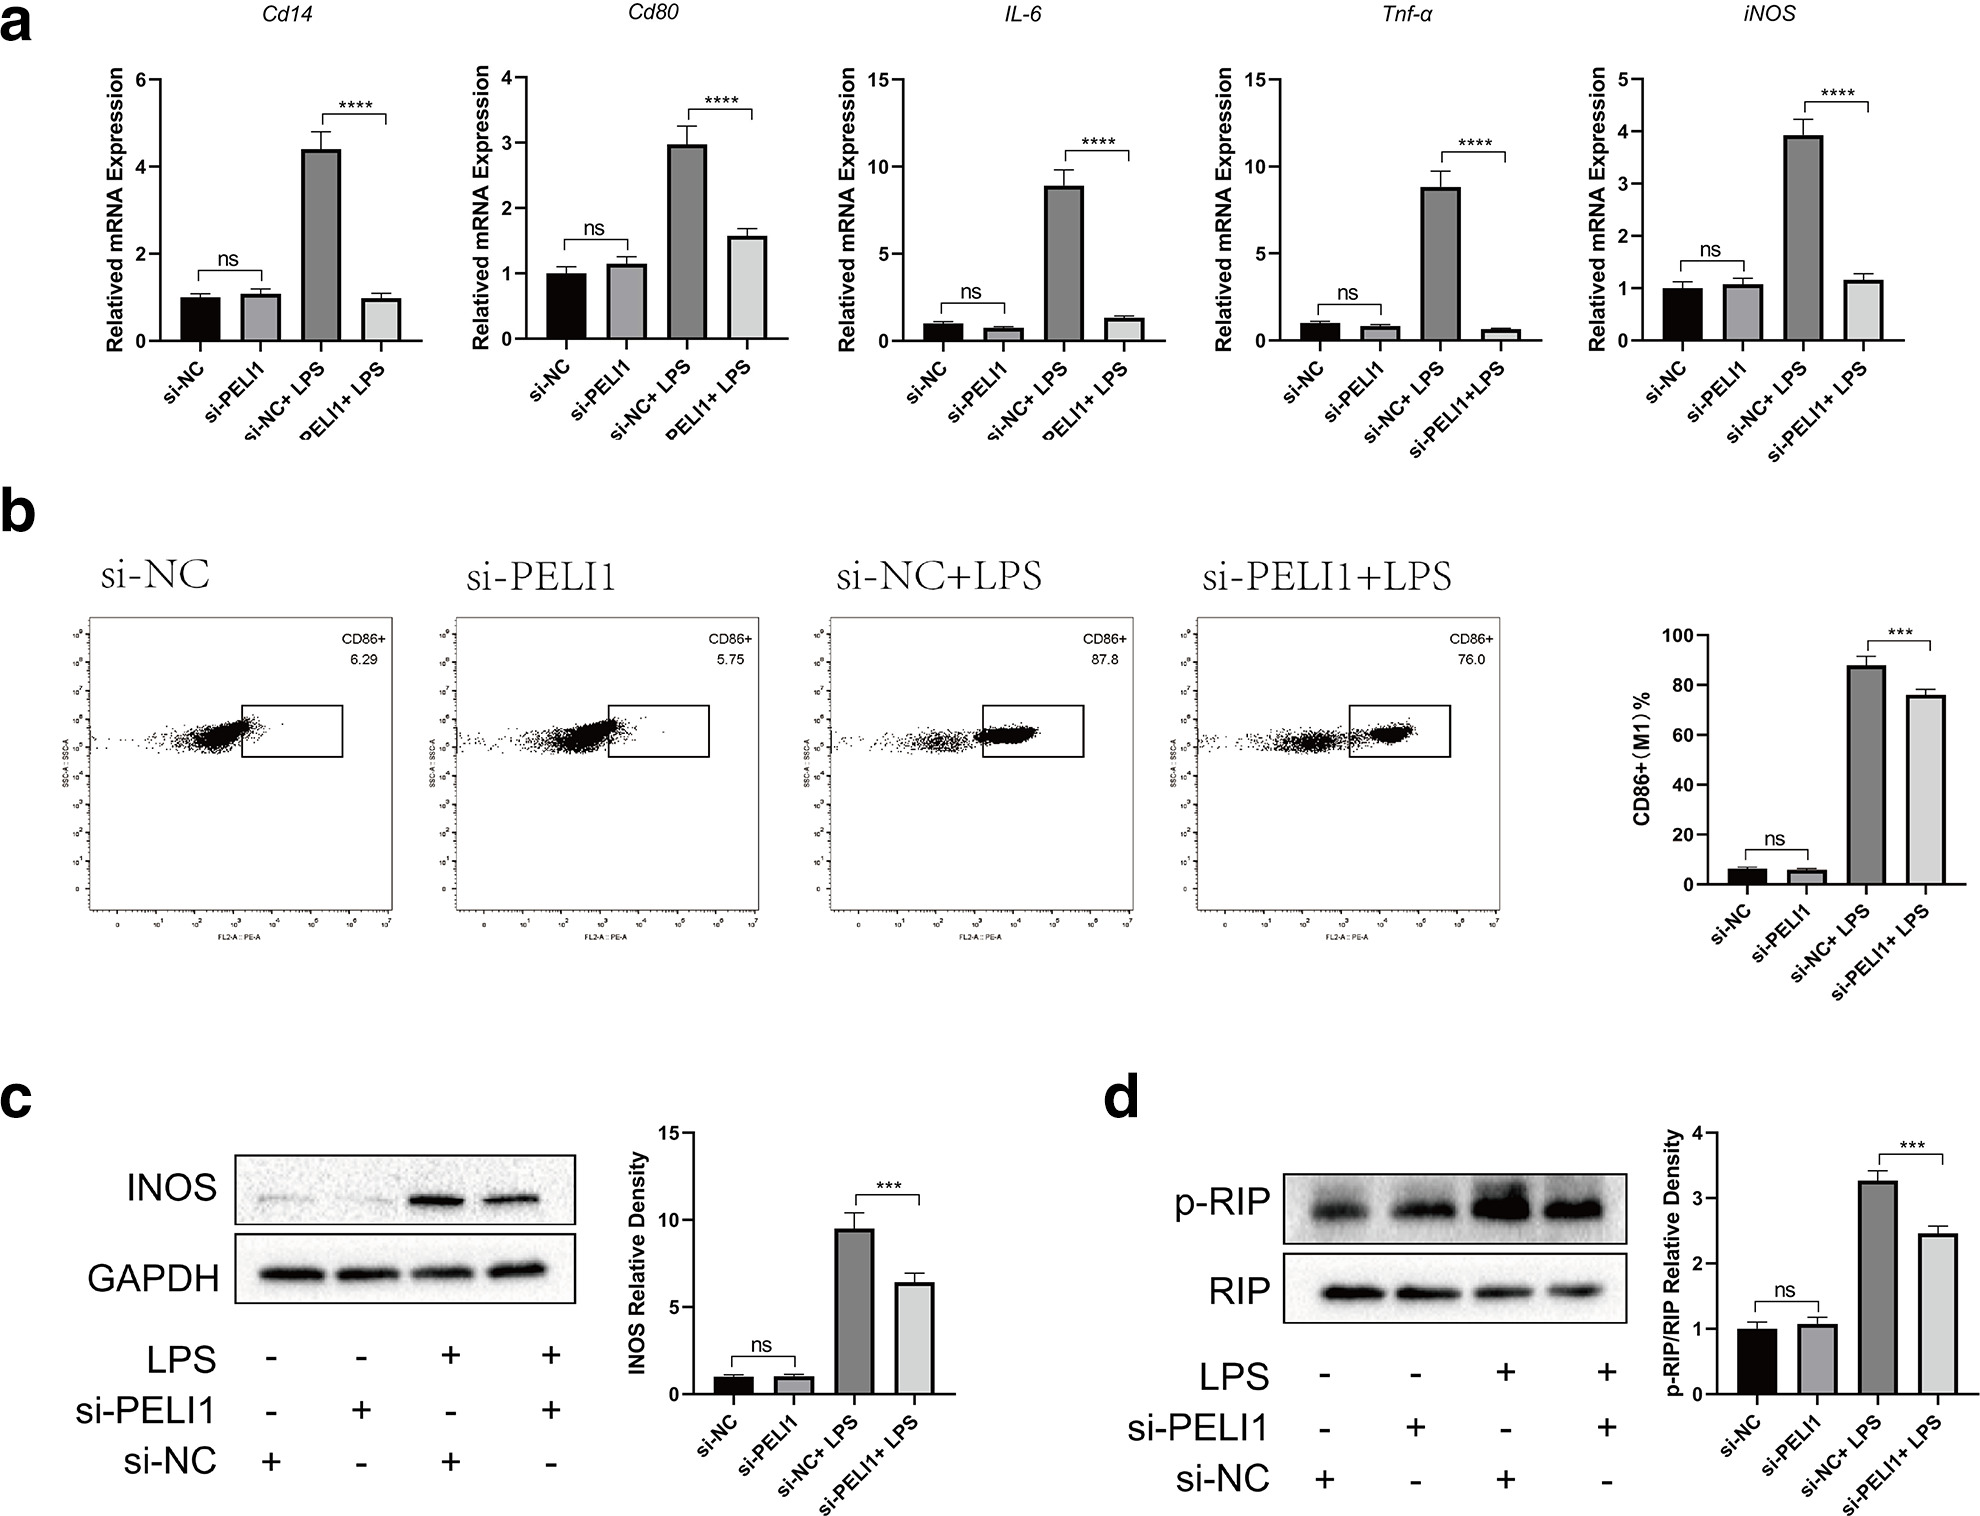 Fig. 4 
            Knockdown of Pellino1 (Peli1) inhibits M1 polarization of macrophages. a) Expression of macrophage M1-related genes Cd14, Cd80, IL-6, TNF-α, and inducible nitric oxide synthase (iNOS) was evaluated by reverse transcription quantitative polymerase chain reaction (RT-qPCR). b) Flow cytometry was used to evaluate macrophage M1-polarization by staining CD86. c) The expression of iNOS was evaluated by western blot. d) Evaluation of p-RIP/RIP expression by western blotting. ***p < 0.001, ****p < 0.0001 compared with si-NC transfected or si-NC+ LPS-treated RAW264.7 cells. GAPDH, glyceraldehyde 3-phosphate dehydrogenase; LPS, lipopolysaccharide; mRNA, messenger RNA; NS, not significant.
          